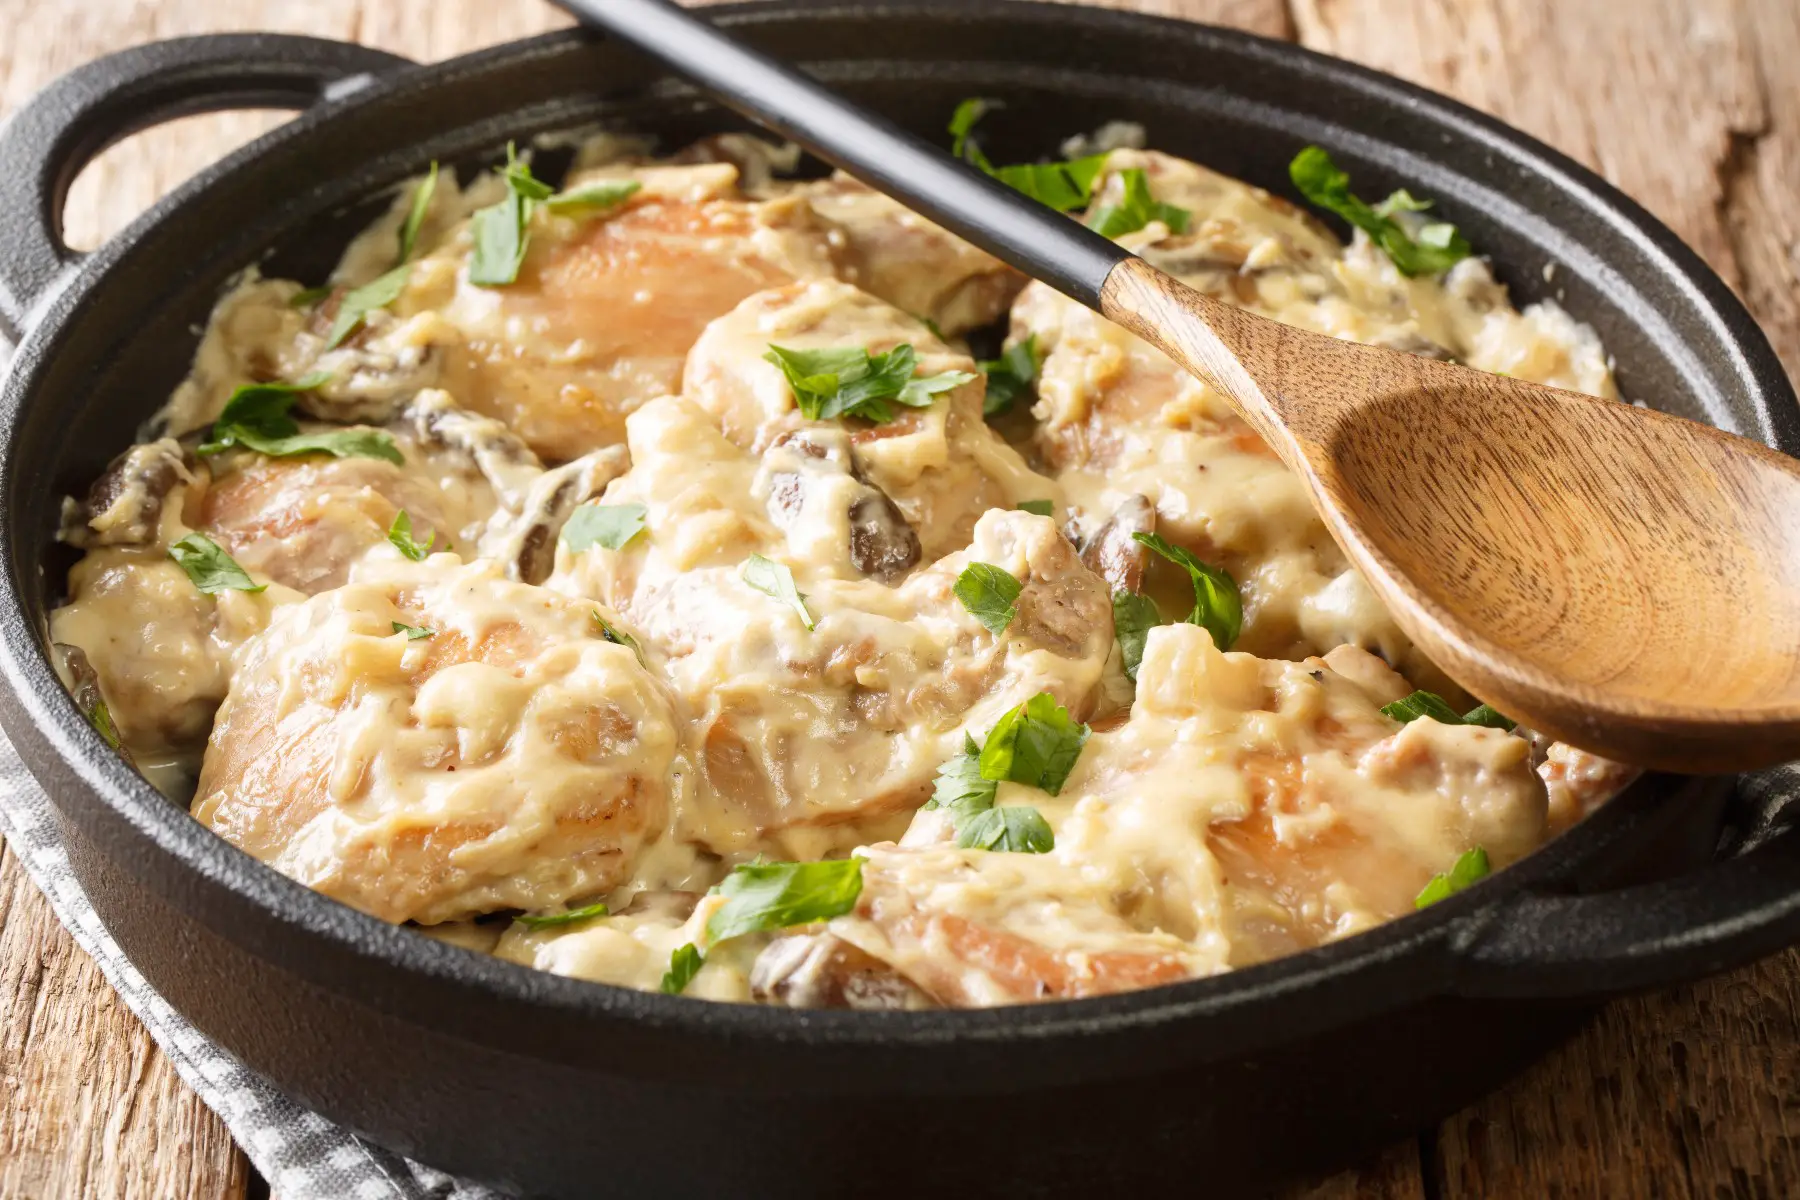 Luxembourger chicken with reisling sauce